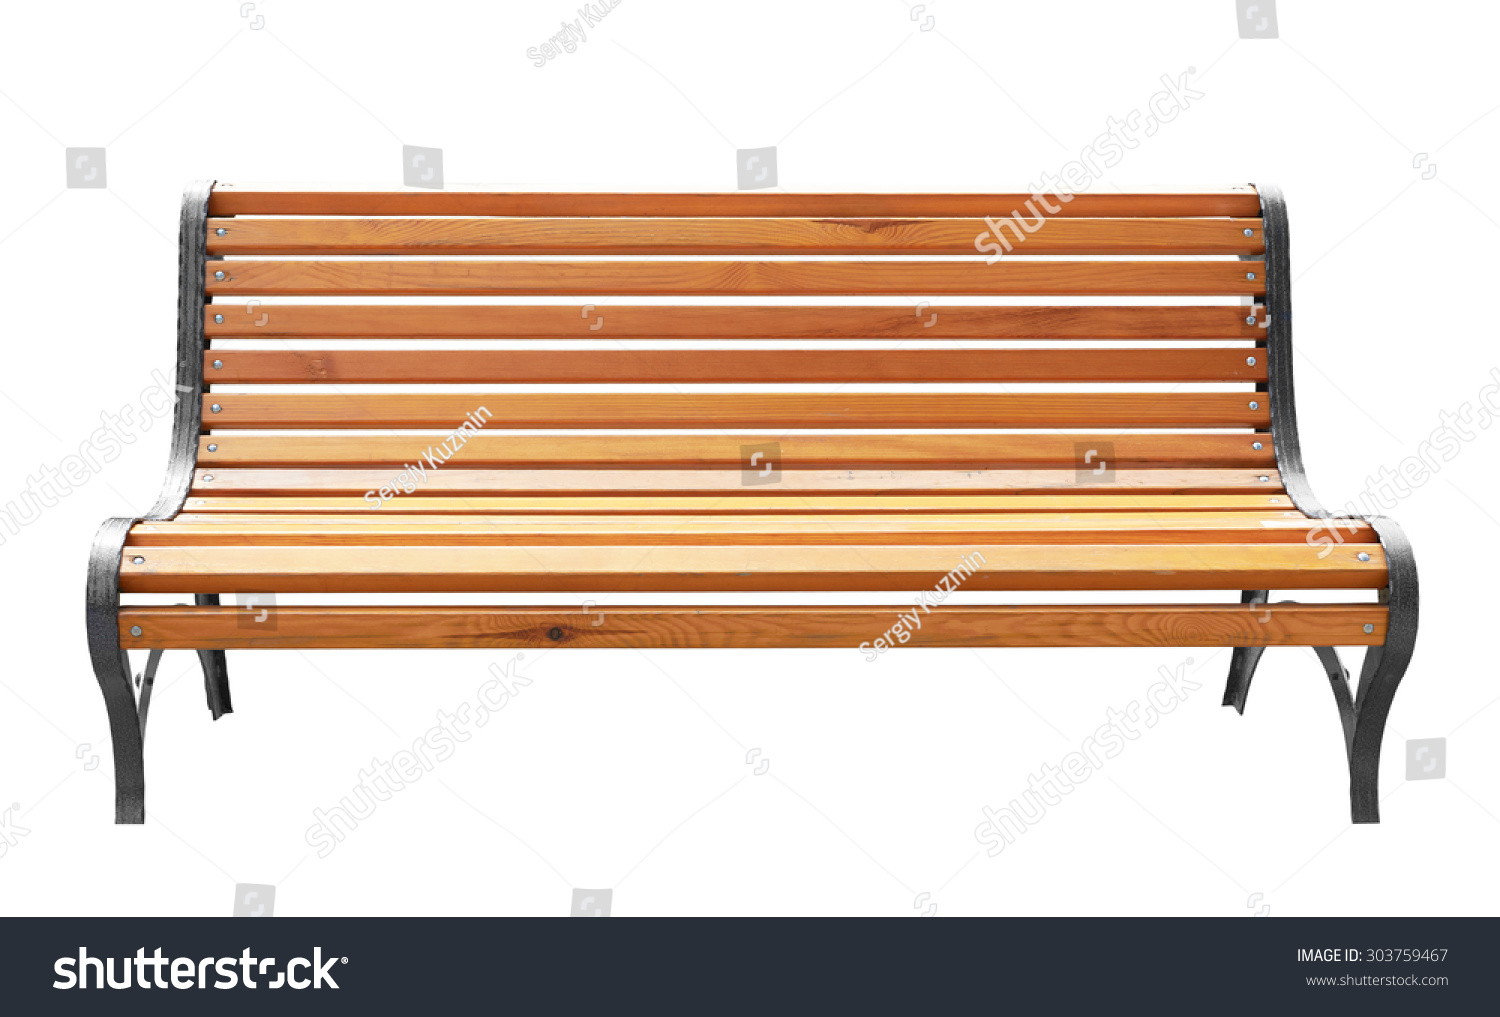 Park bench isolated over a white background #303759467